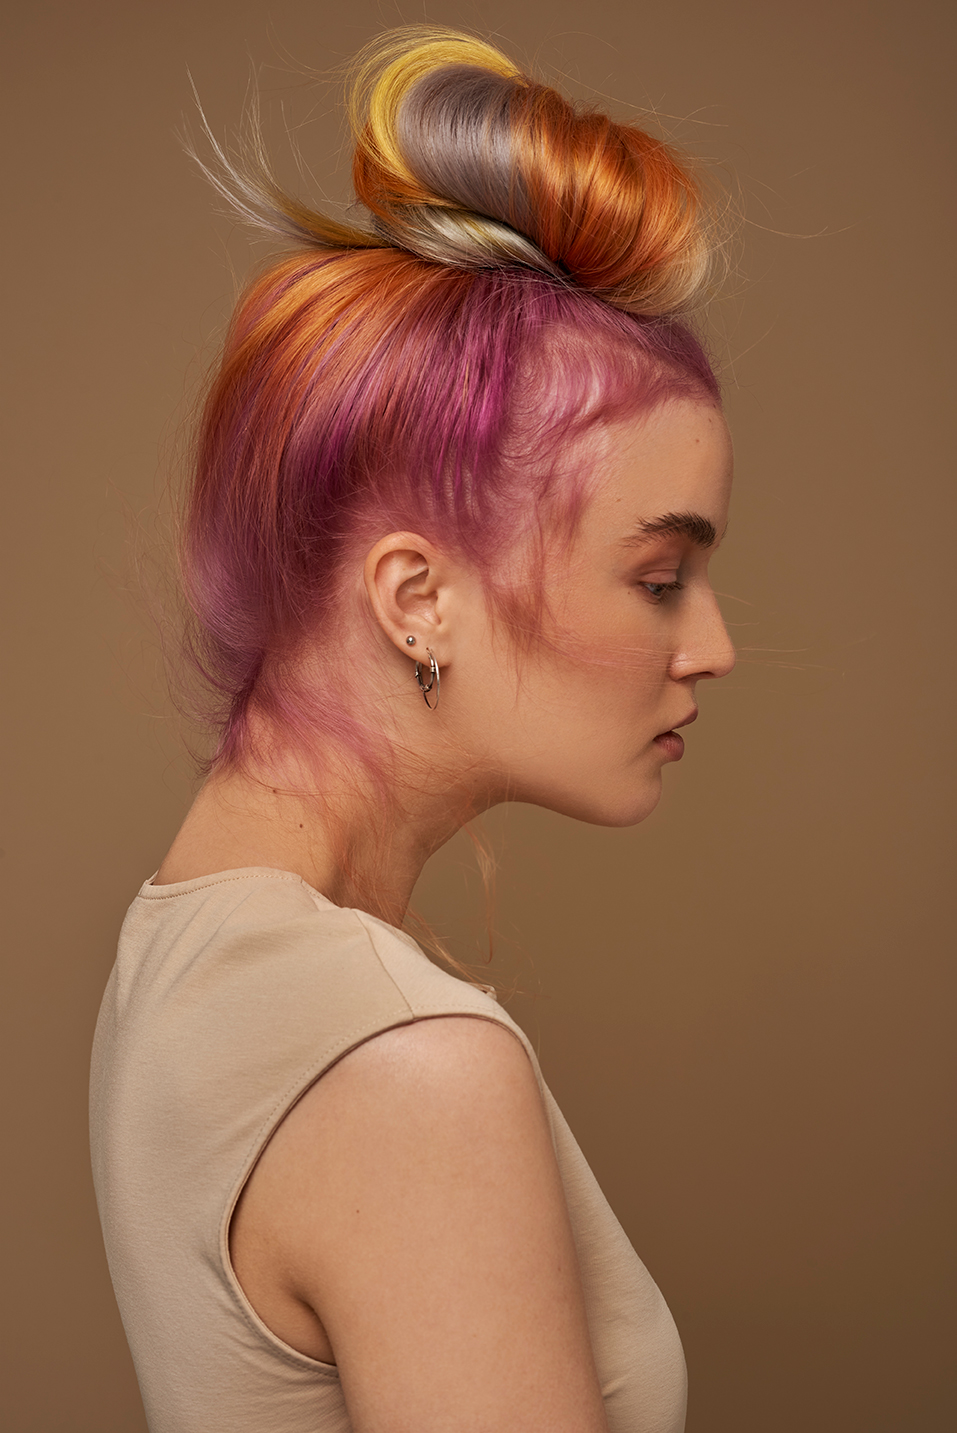 Photo in the studio on a beige background with colourful hair, having both Pink, Yellow and purple in her hair.